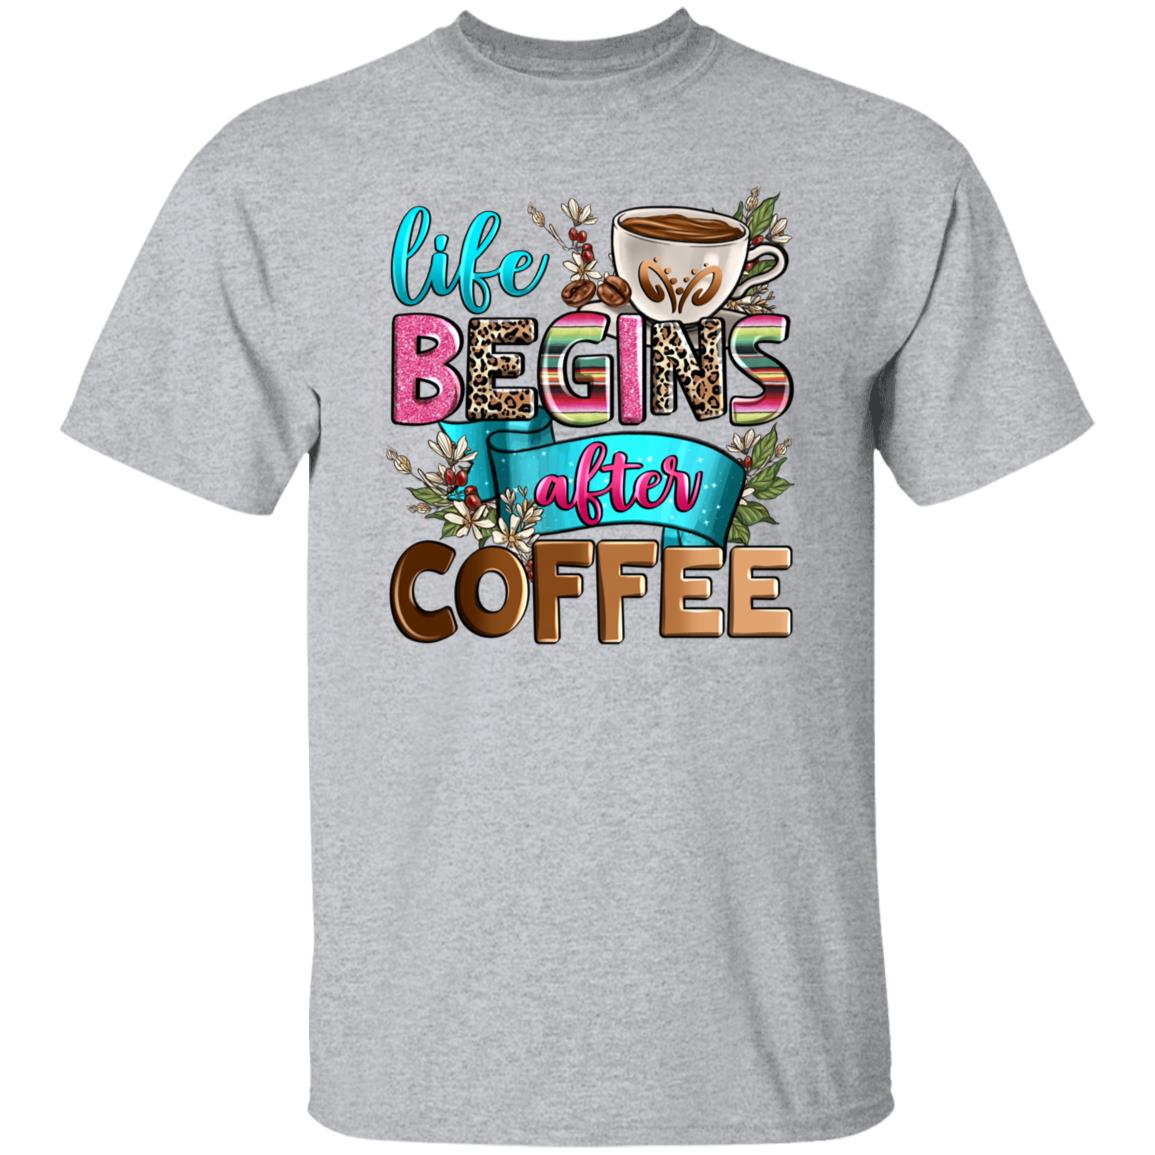 Life begins after coffee T-Shirt gift Morning Coffee lover Unisex Tee Sand White Sport Grey-Family-Gift-Planet